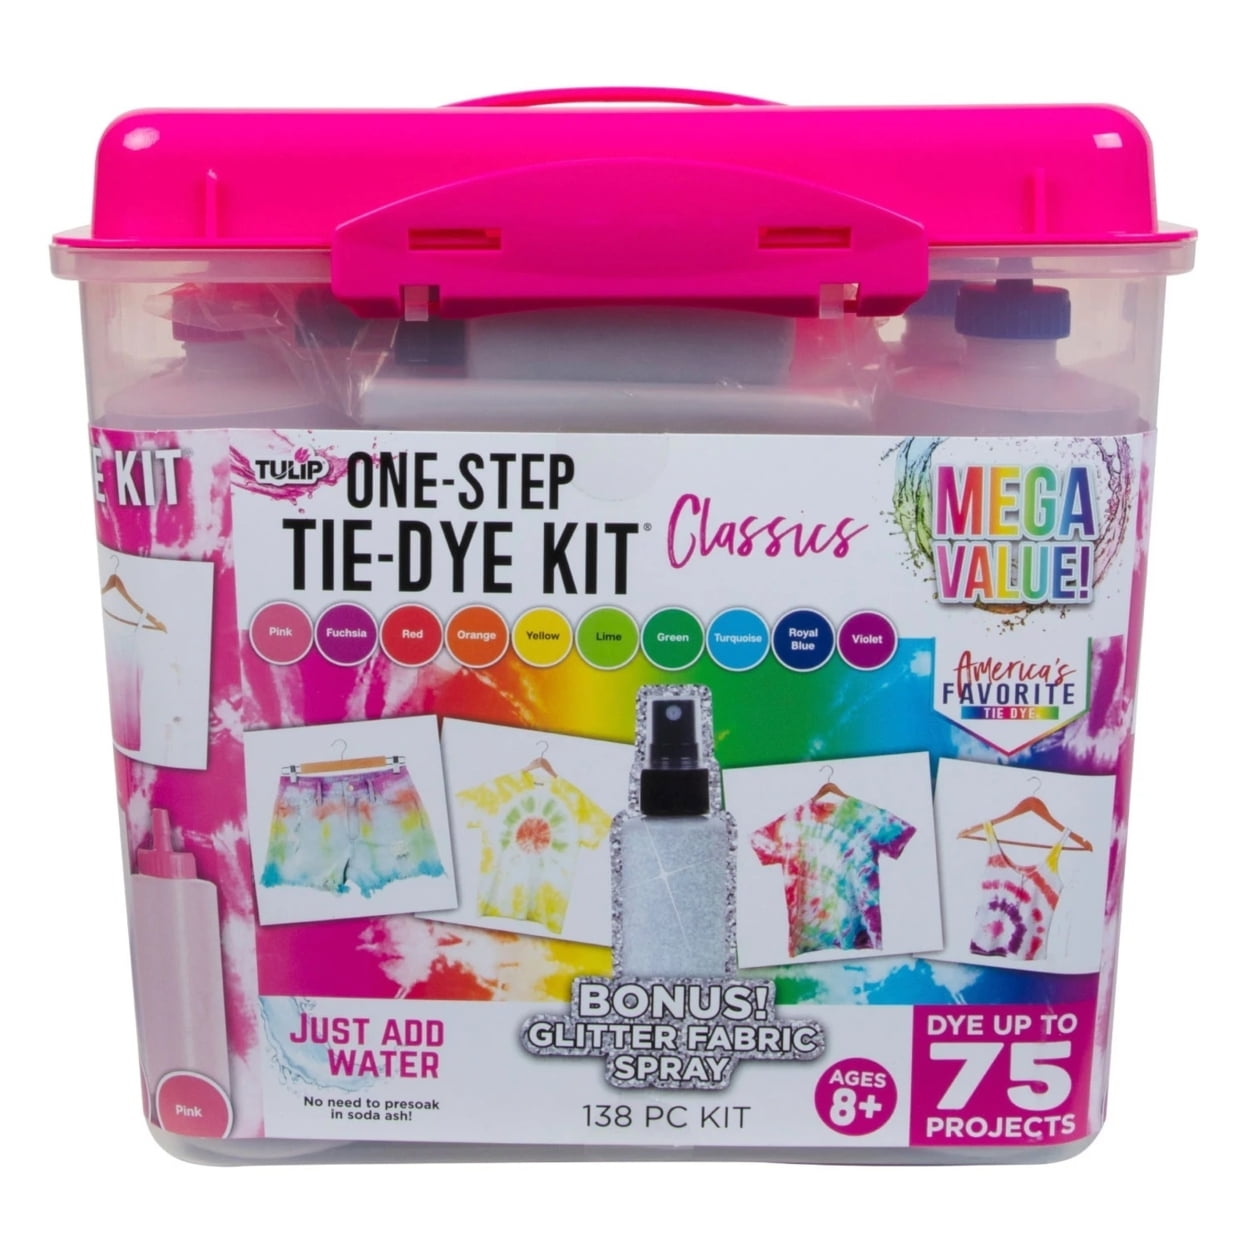 Tulip One-Step Tie-Dye 8 Color Block Party Kit